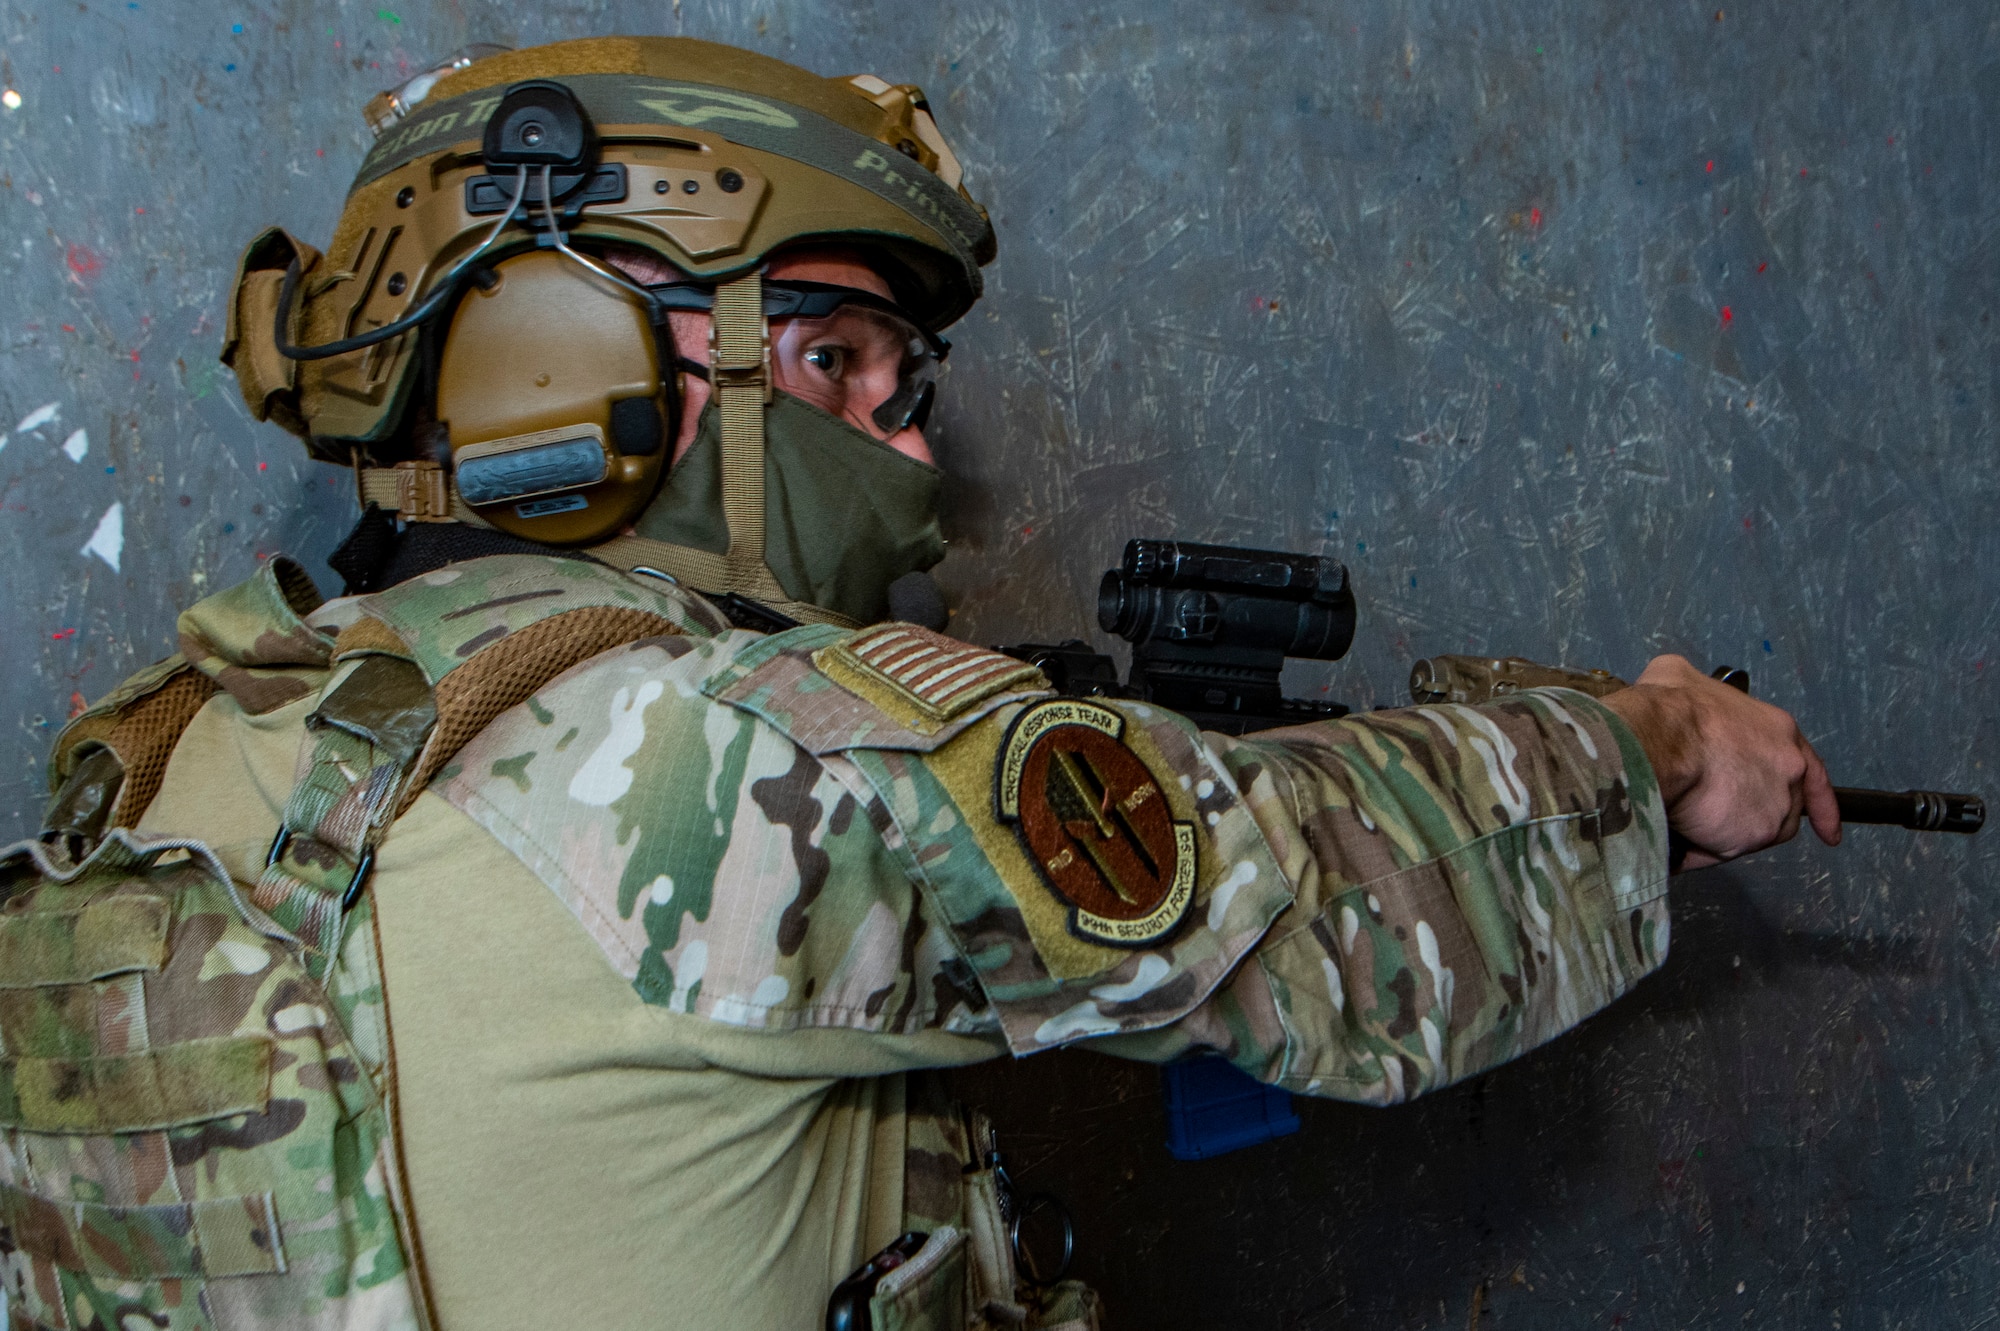 Airman points a rifle during training.